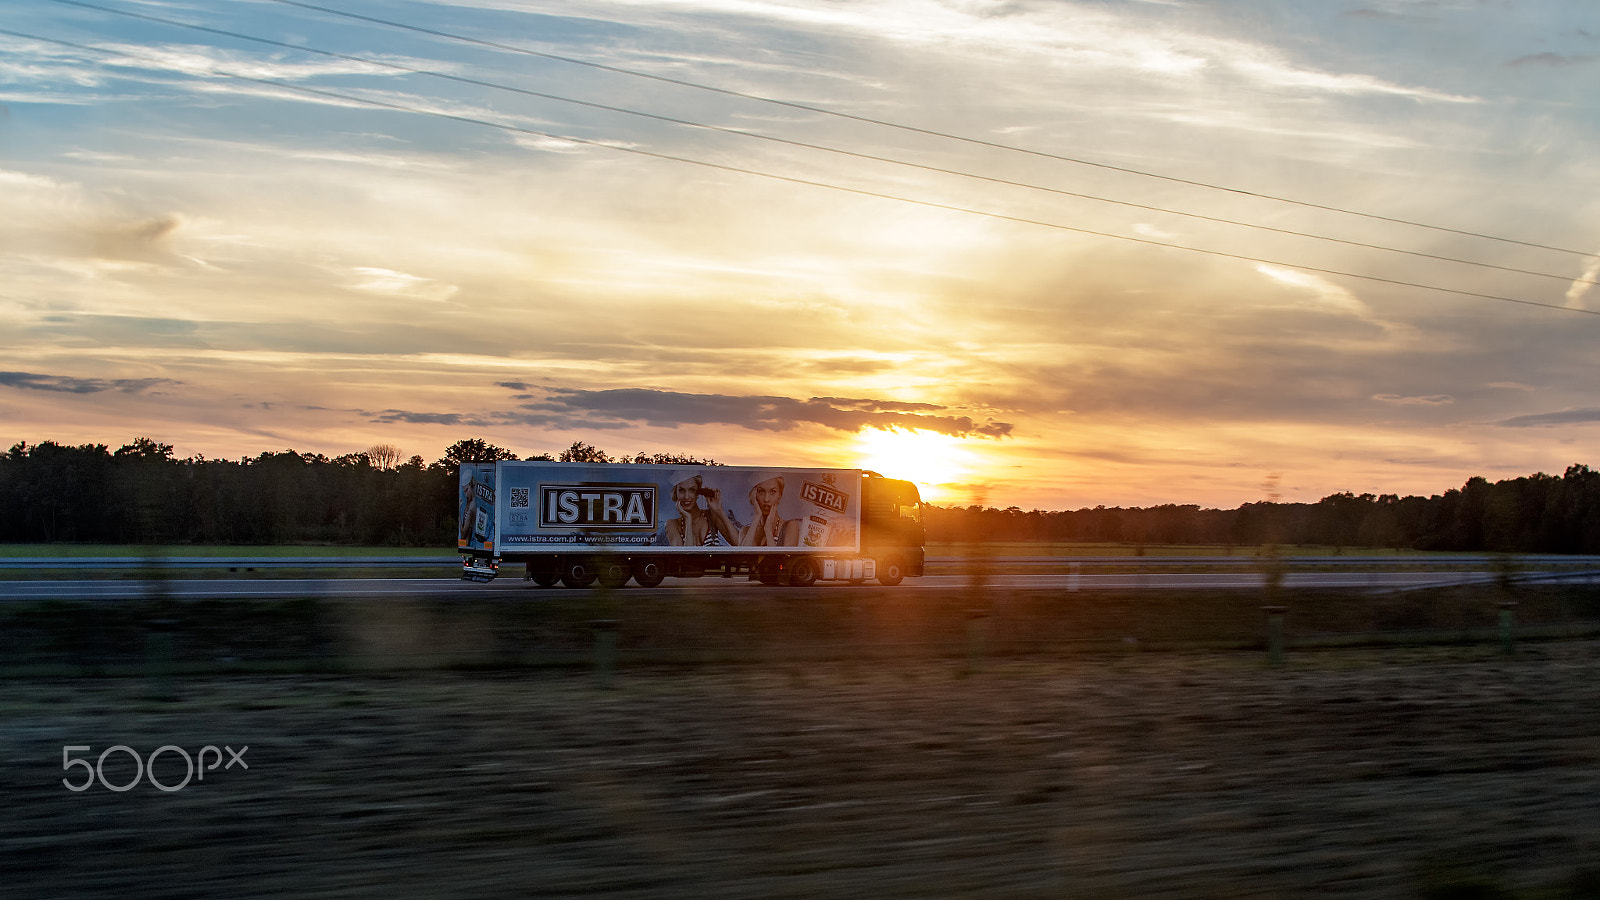 Sigma 30mm f/1.4 DC HSM sample photo. Istra truck in the sunset photography